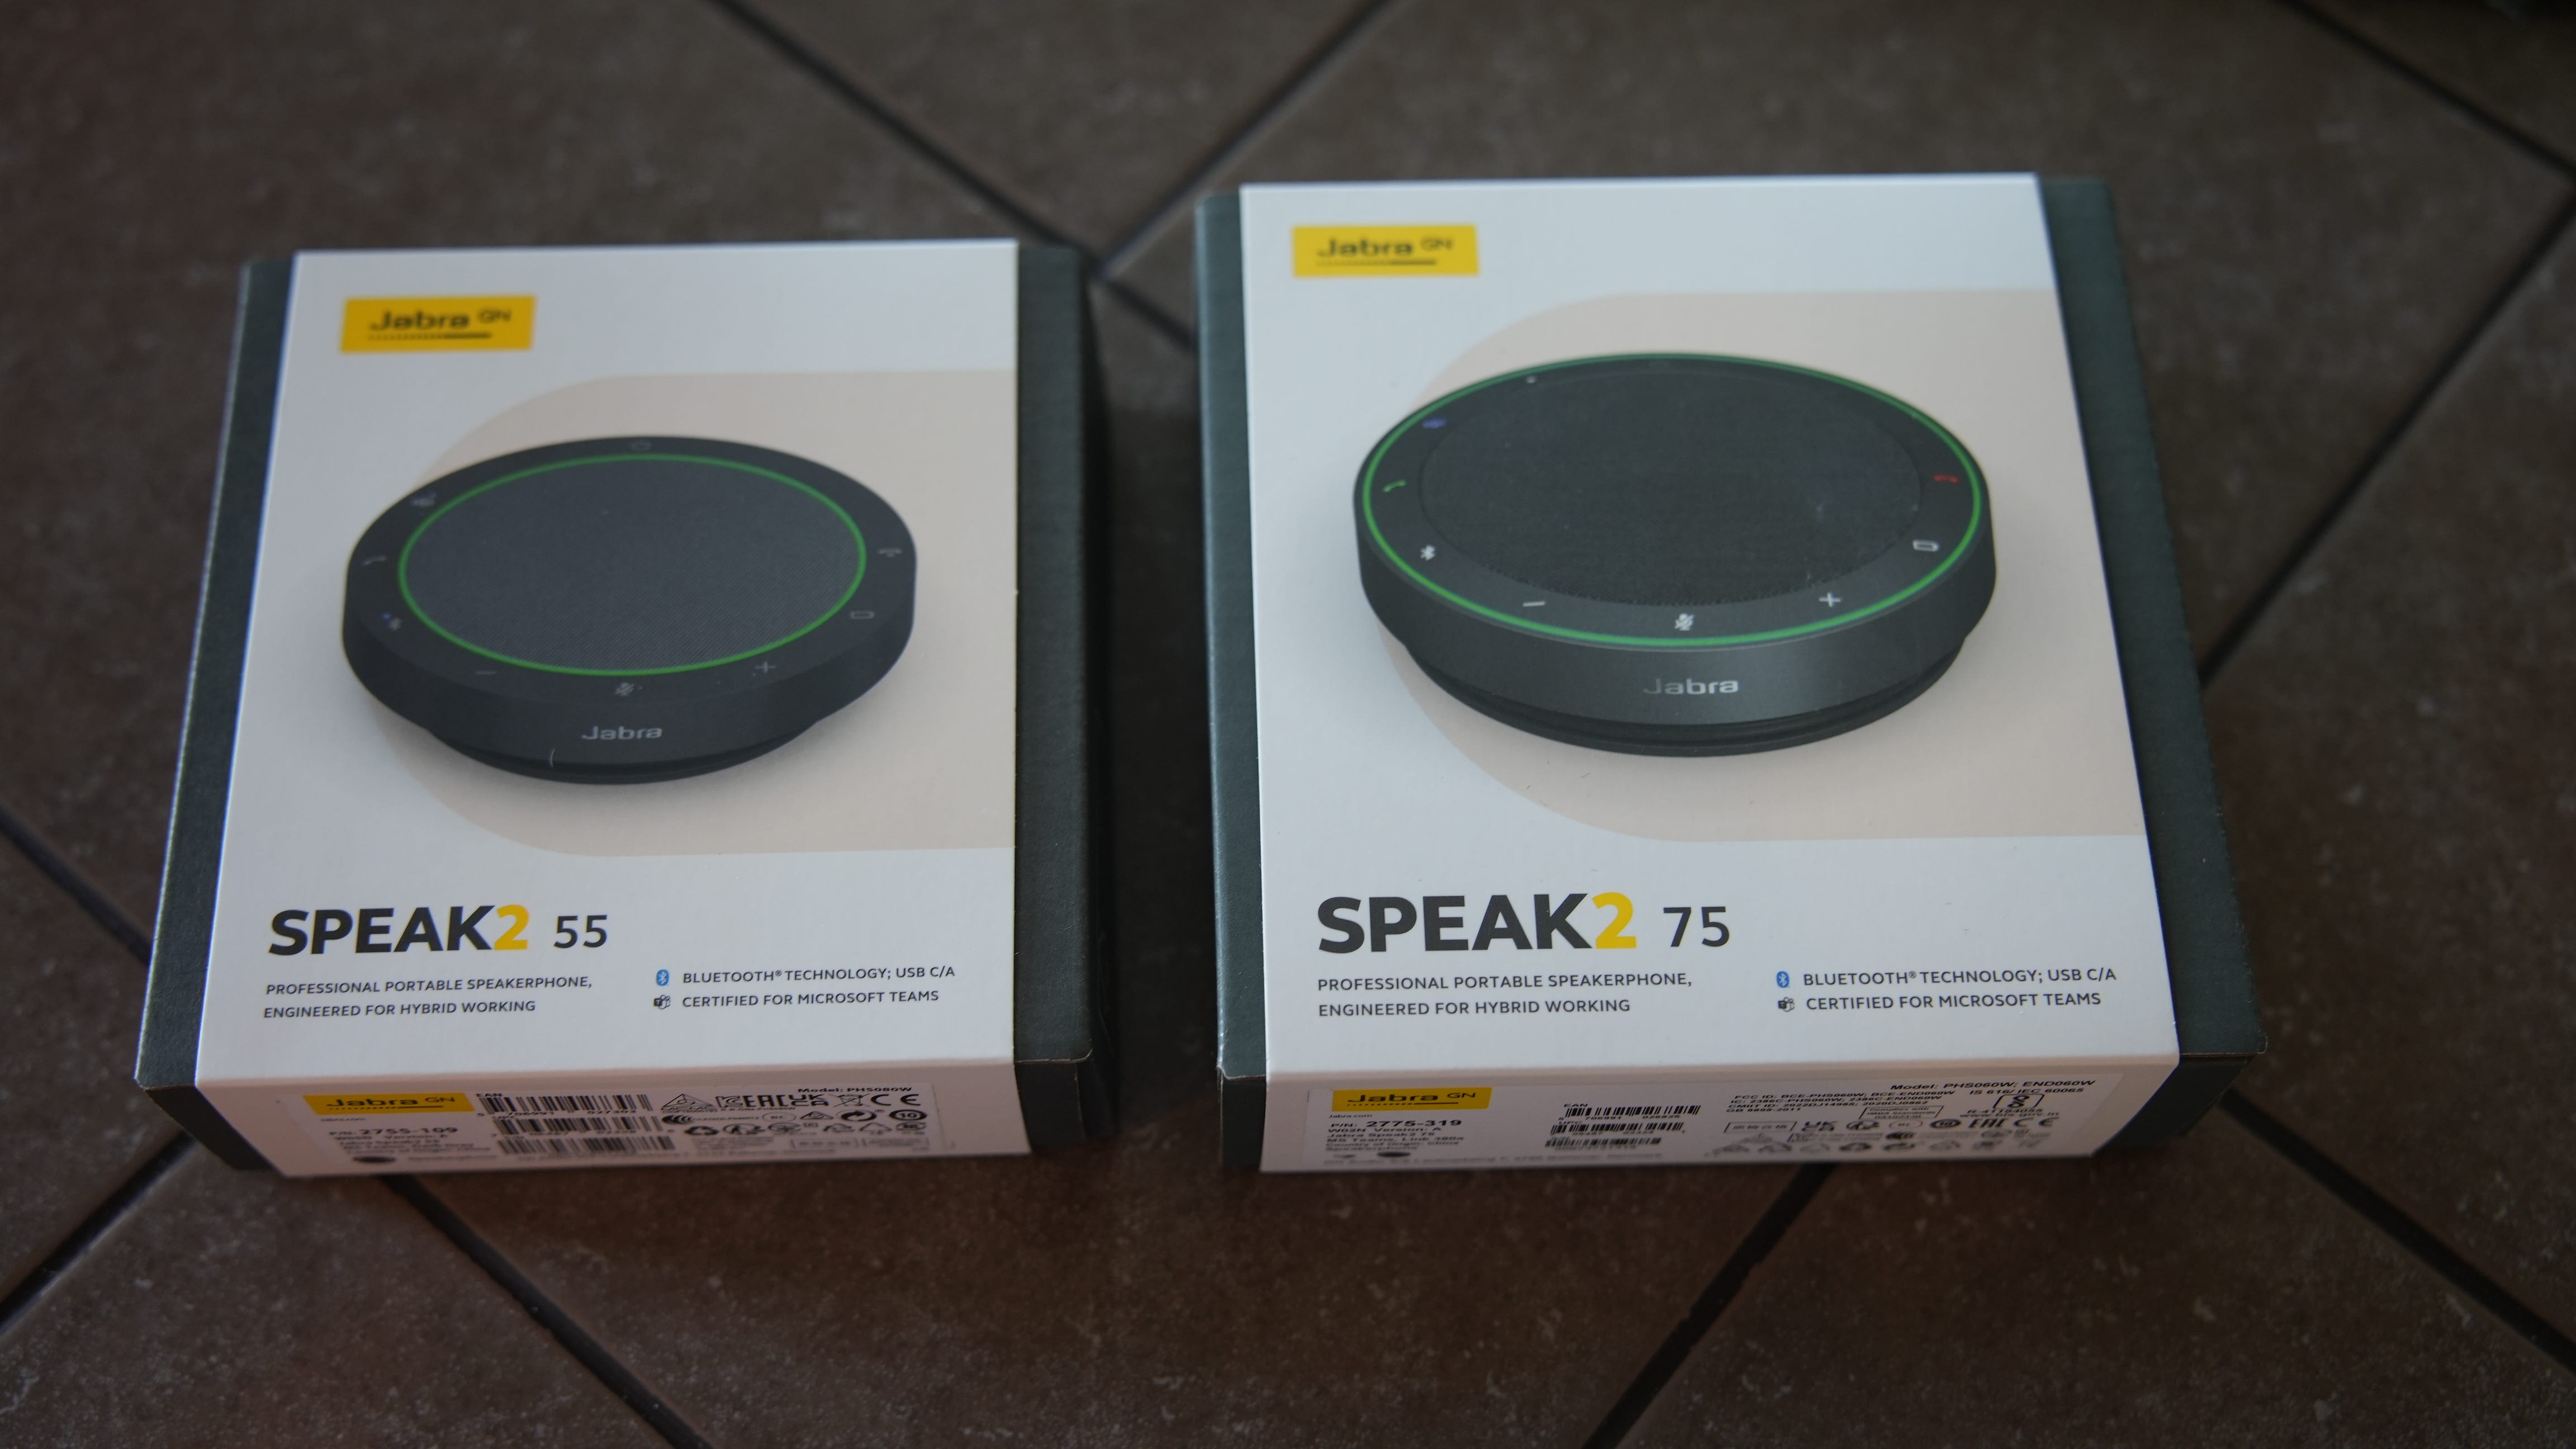 a Speak2 75 speakerphone with review: Jabra high Free work quality hybrid your